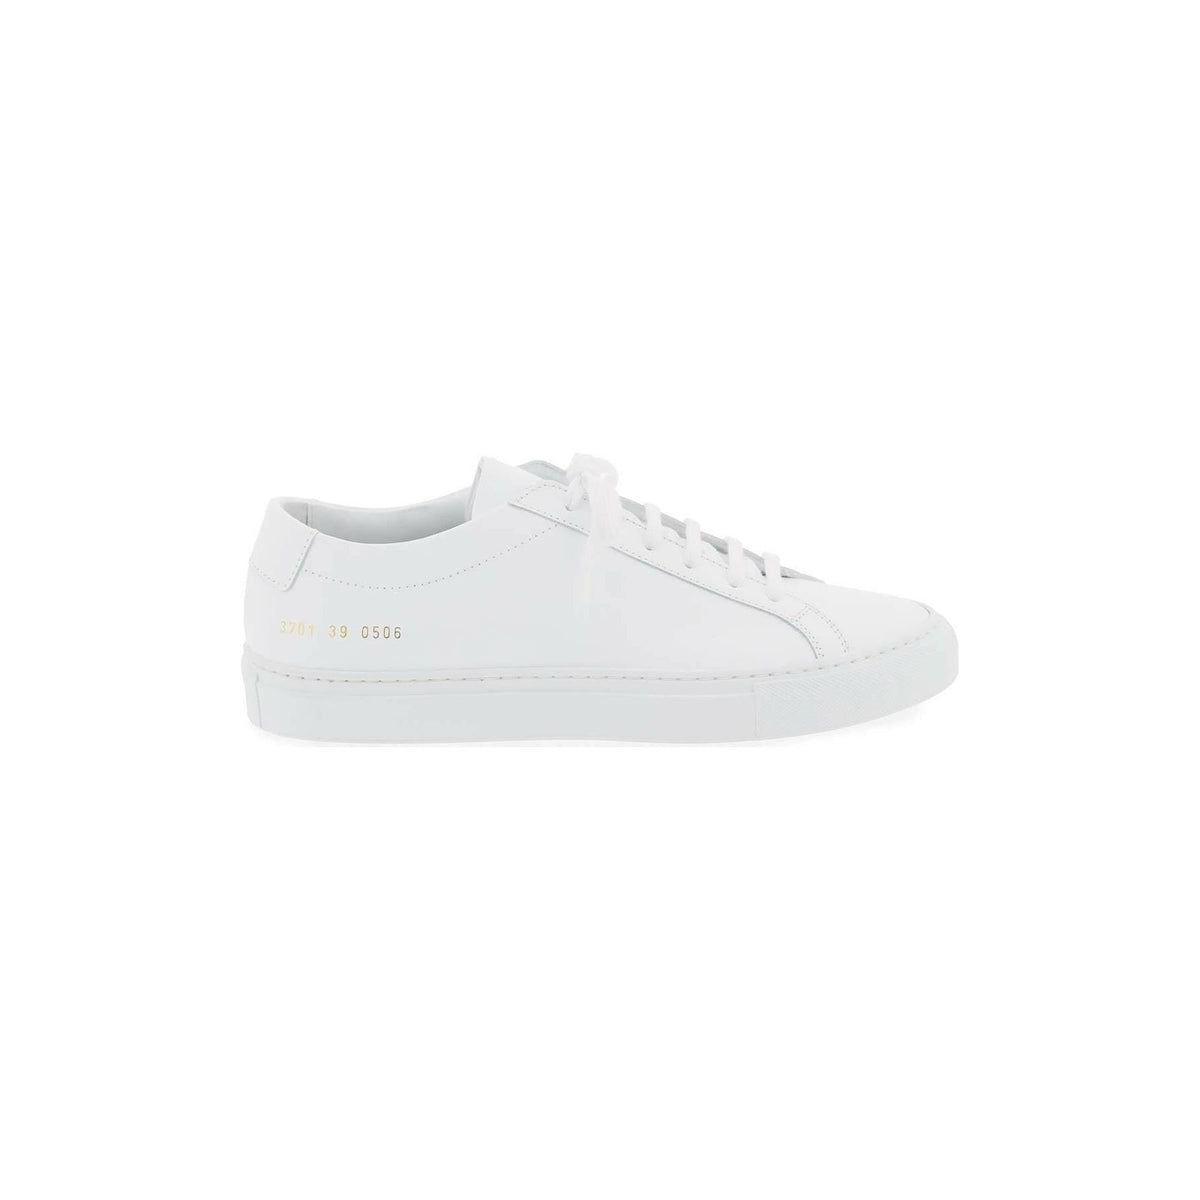 COMMON PROJECTS - White Original Achilles Low-Top Leather Sneakers - JOHN JULIA